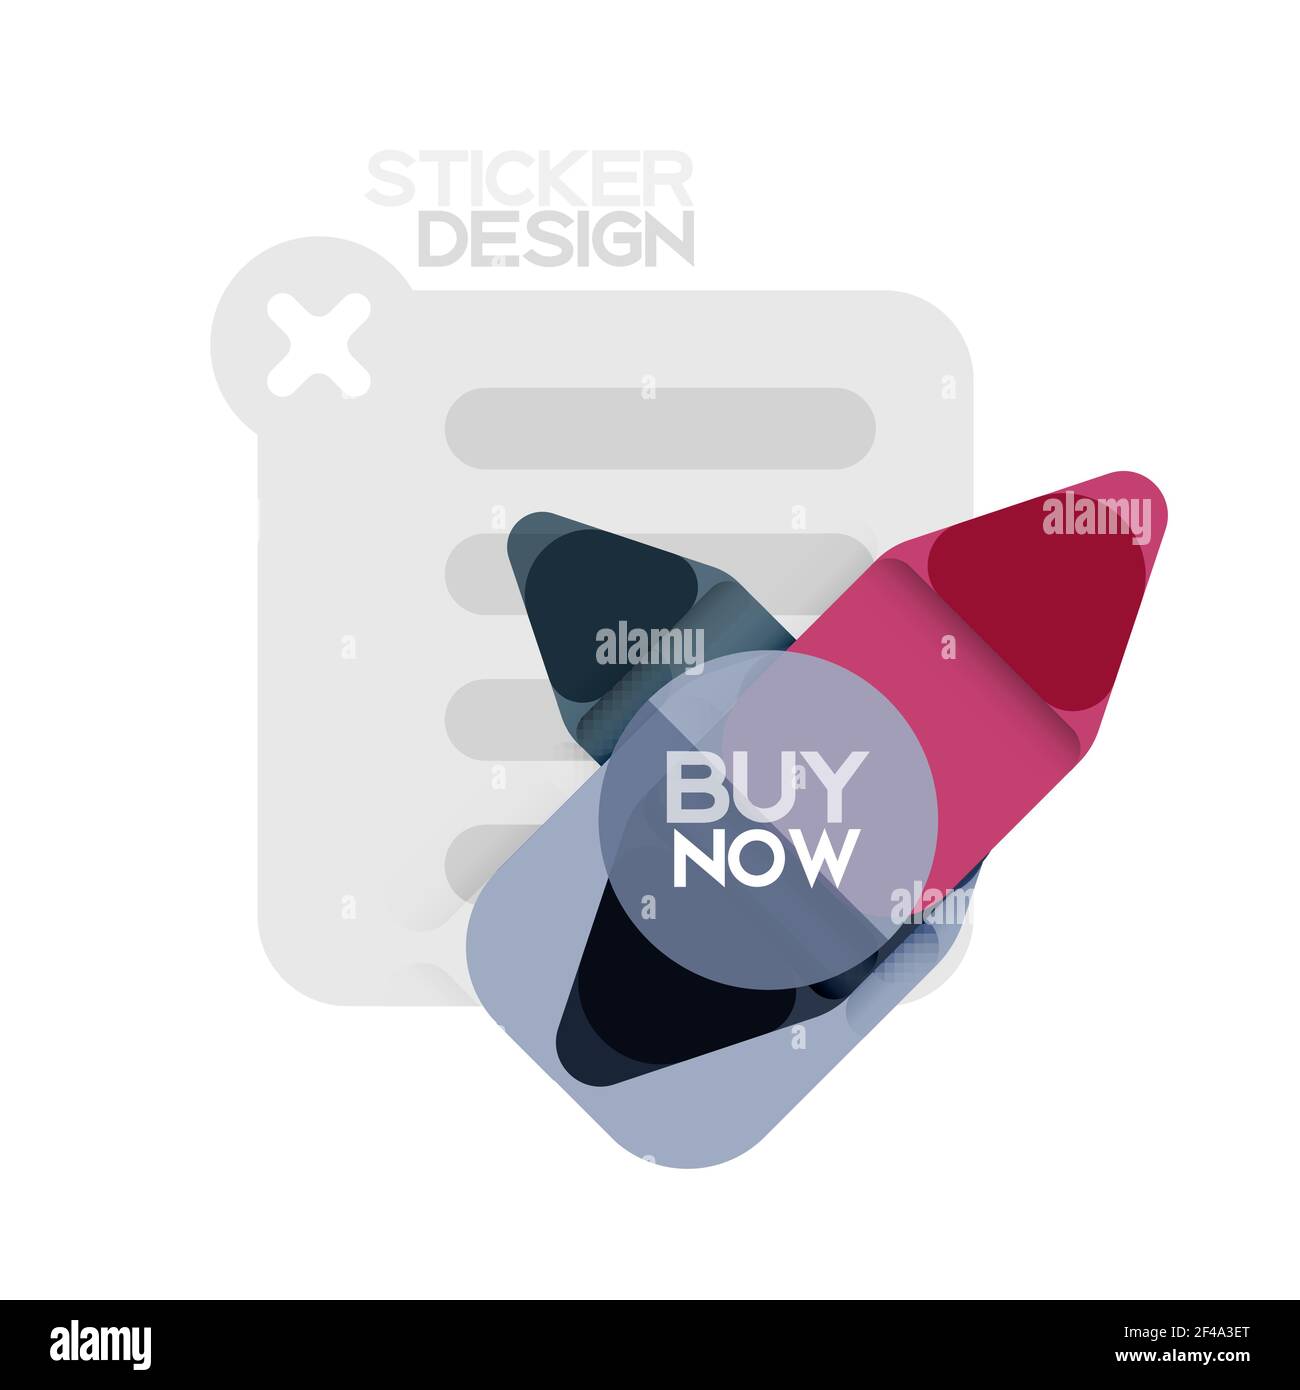 Flat design triangle arrow shape geometric sticker icon, paper style design with buy now sample text, for business or web presentation, app or interface buttons, internet website store banners. Flat design triangle arrow shape geometric sticker icon, paper style design with buy now sample text, for business or web presentation, app or interface buttons, internet website store banners and labels Stock Vector